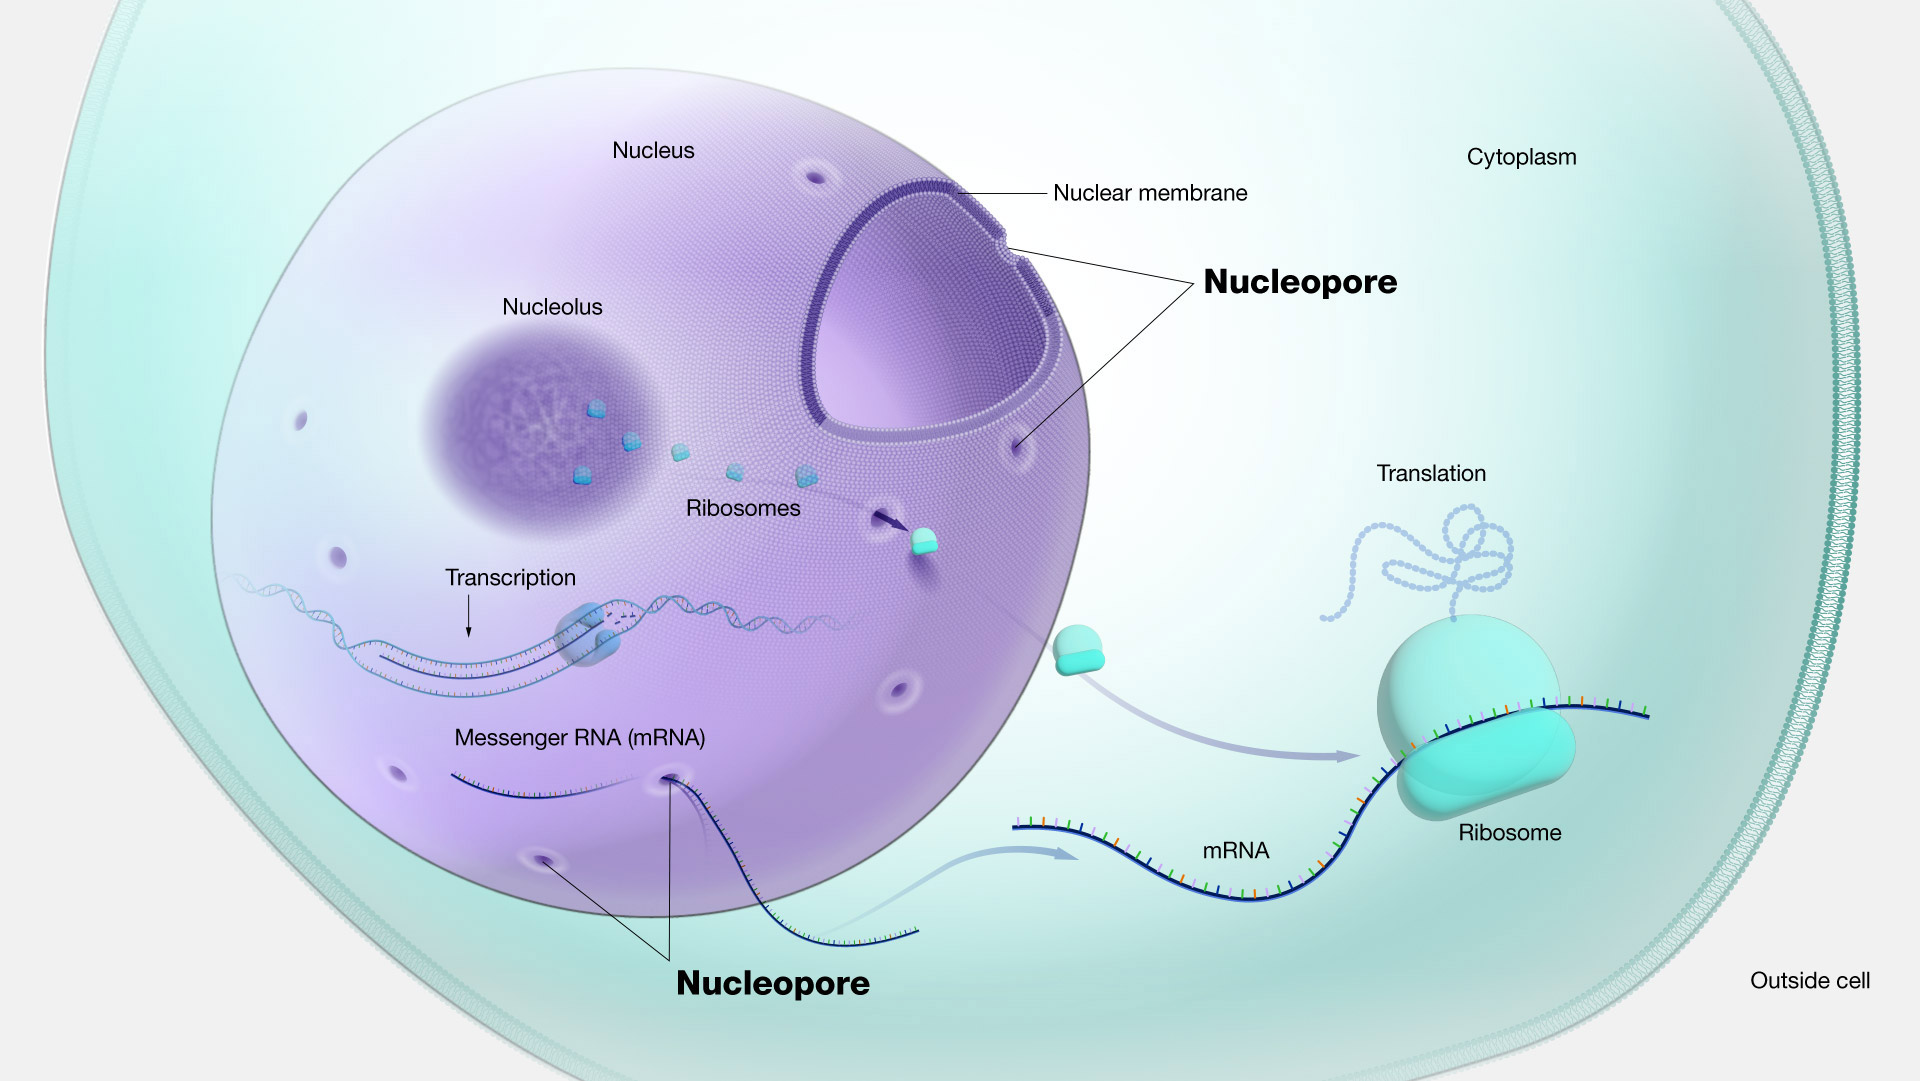  Nucleopore